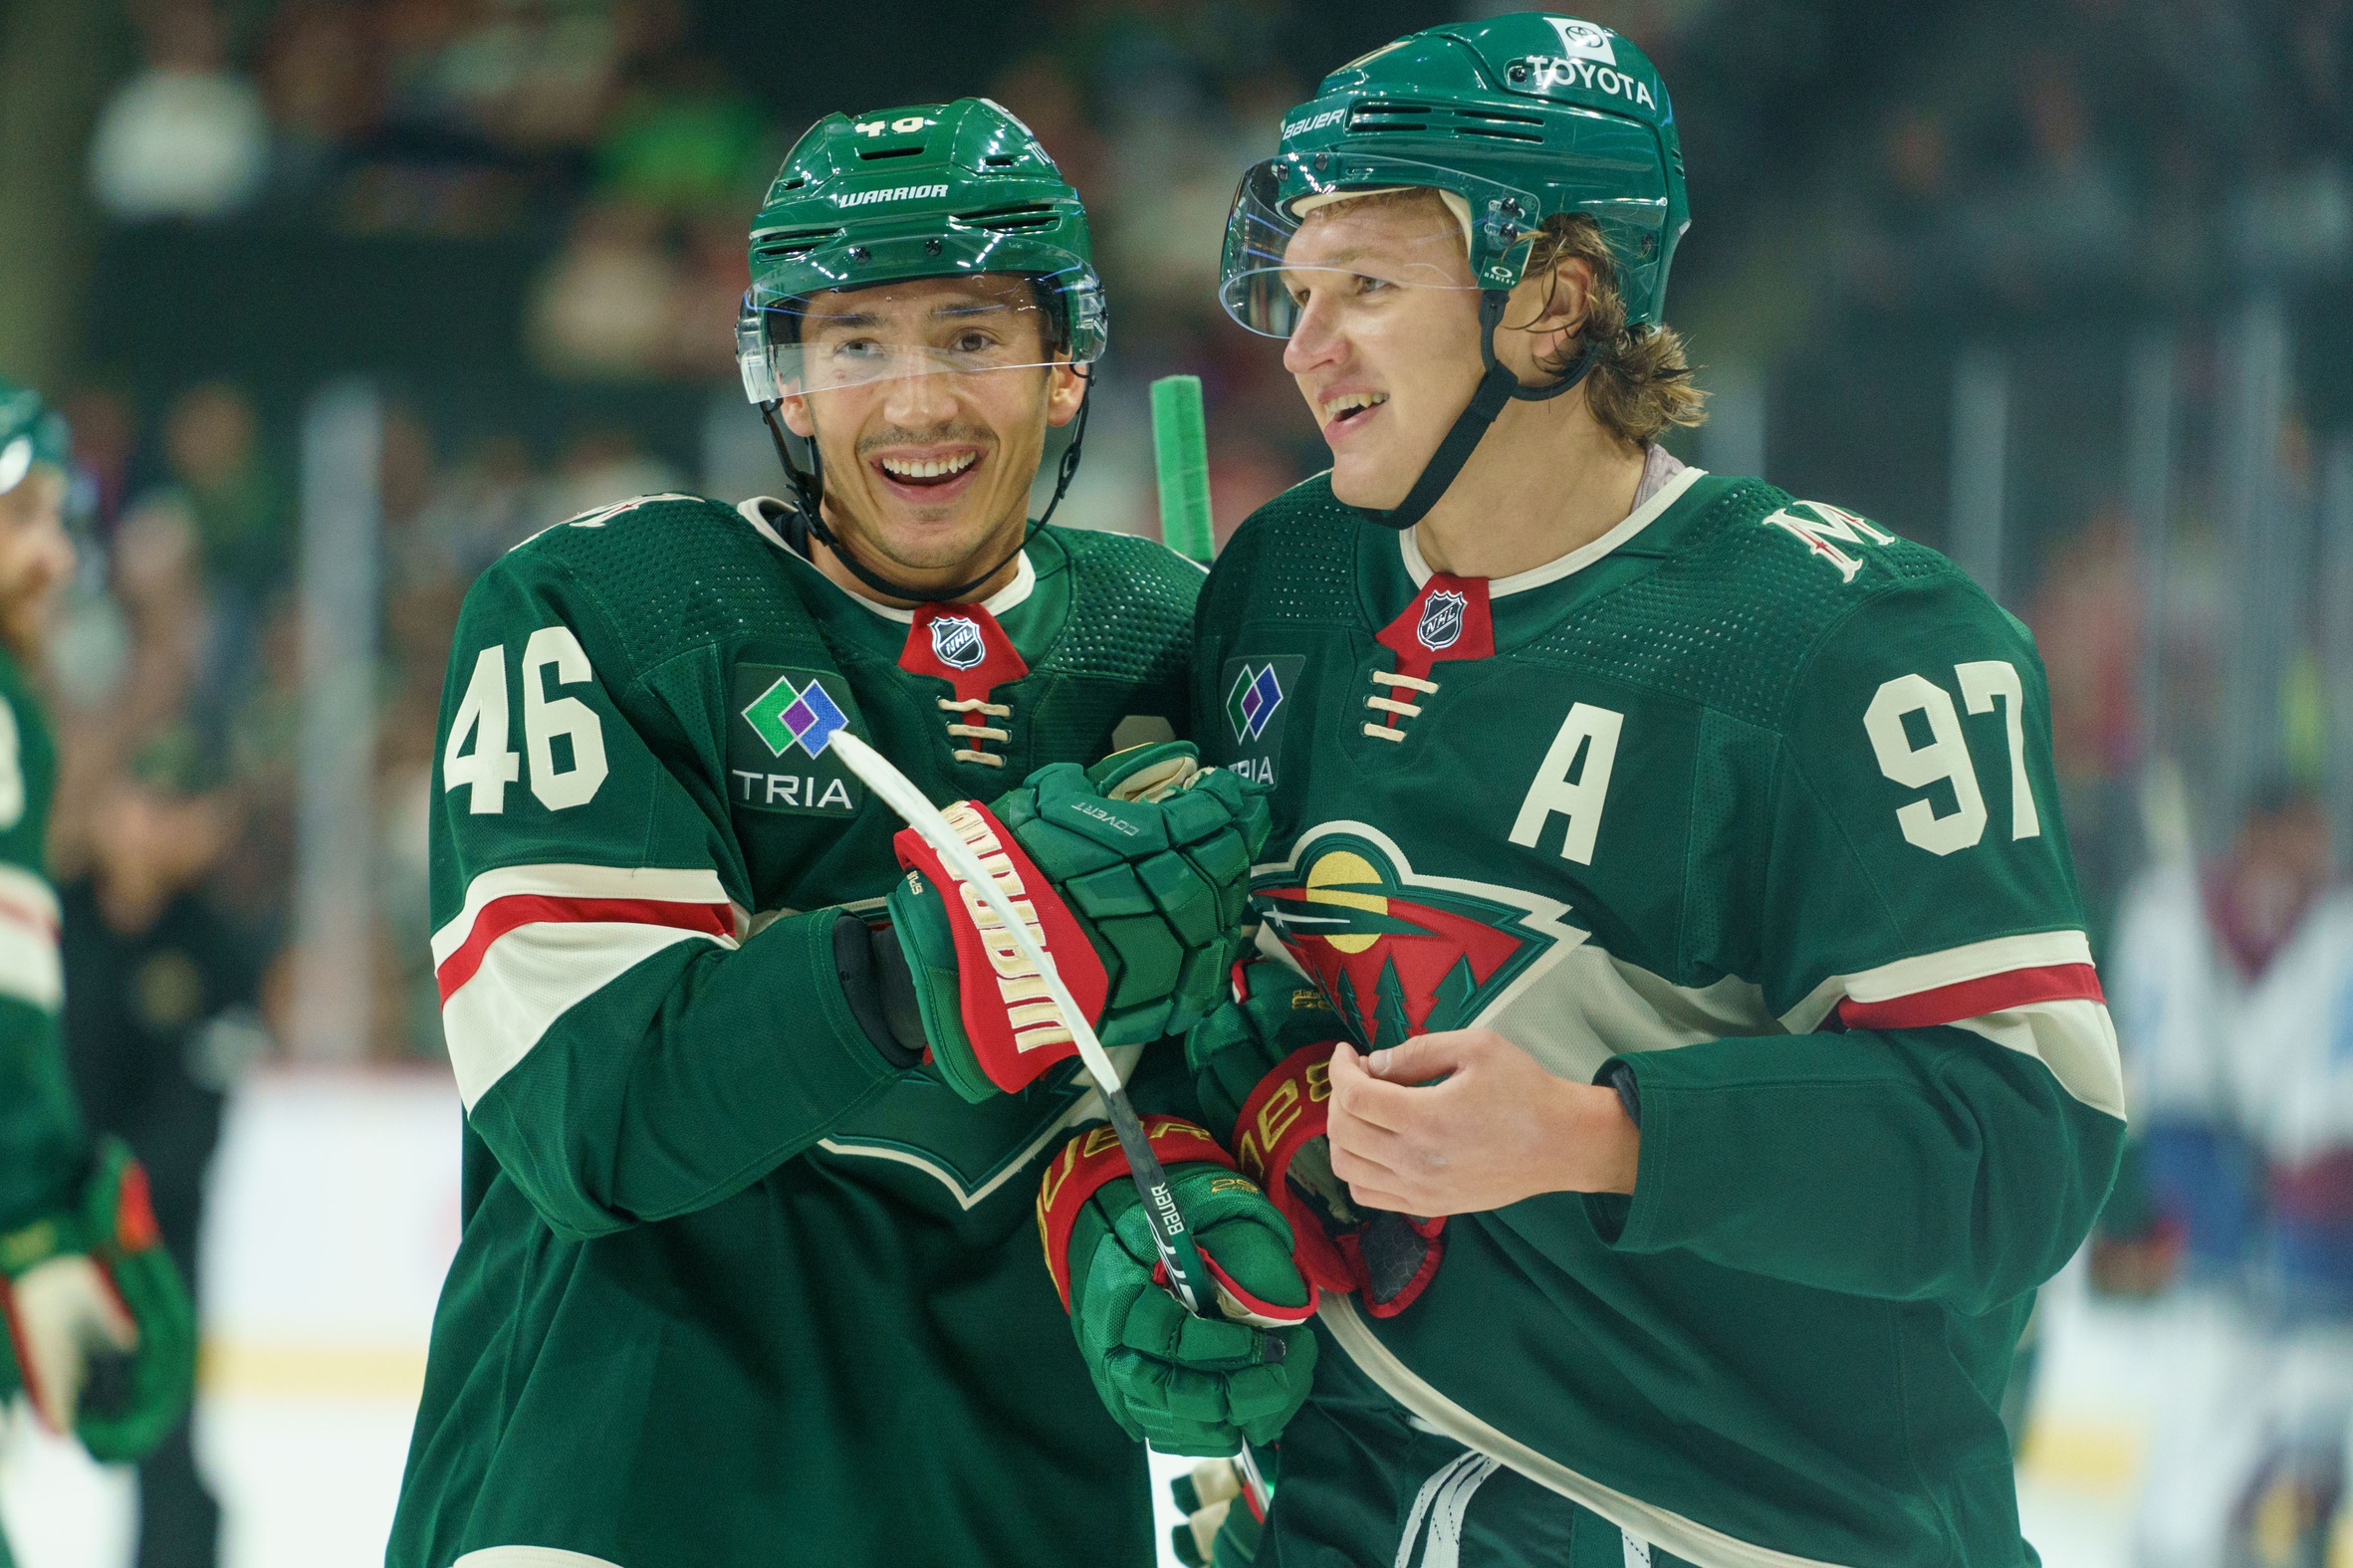 In his first week, Kirill Kaprizov fits in well with Wild